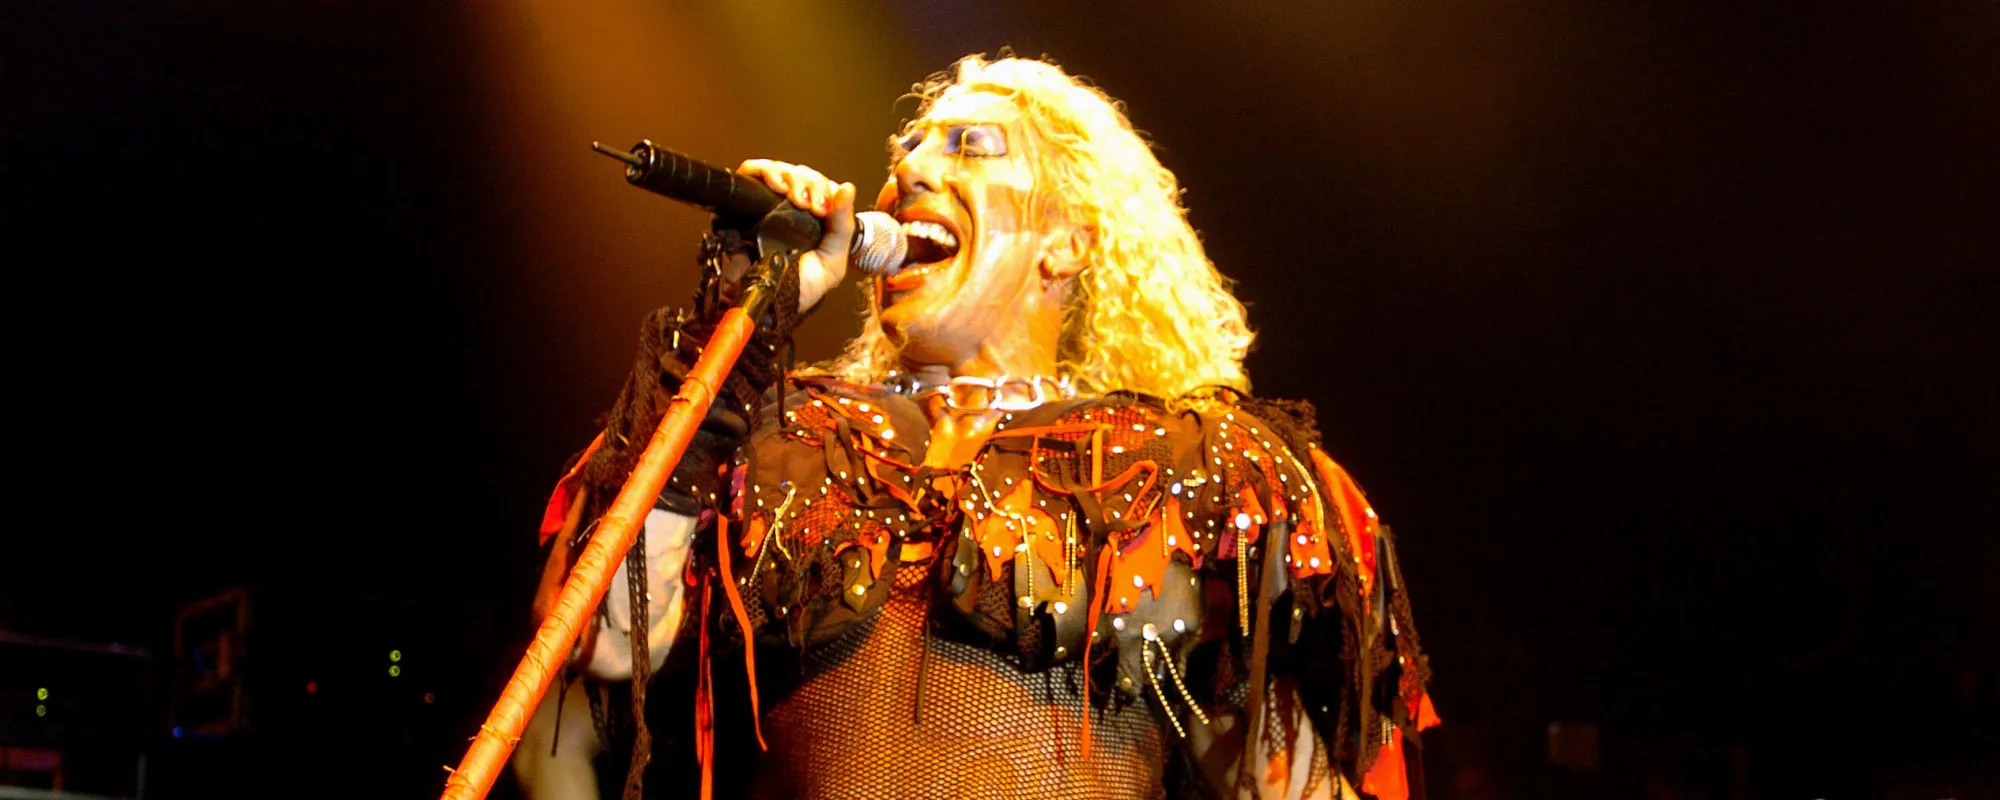 9 Great Deep Cuts by Twisted Sister